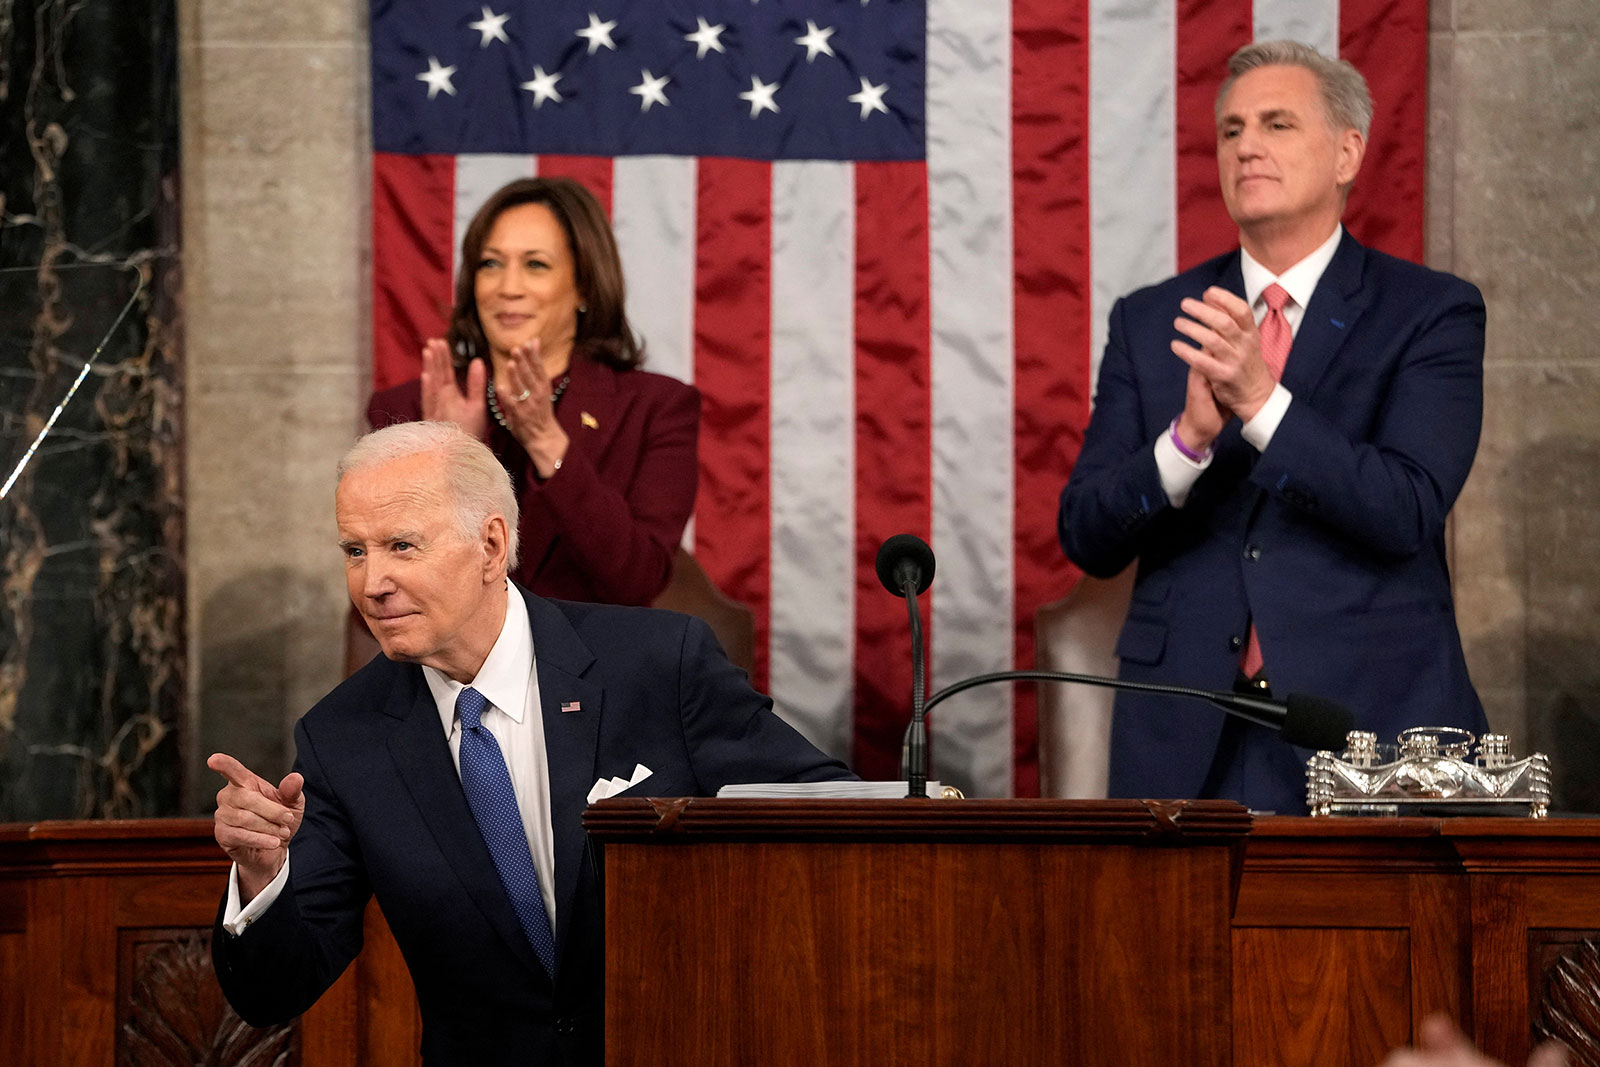 President Biden points as he delivers his State of the Union address.